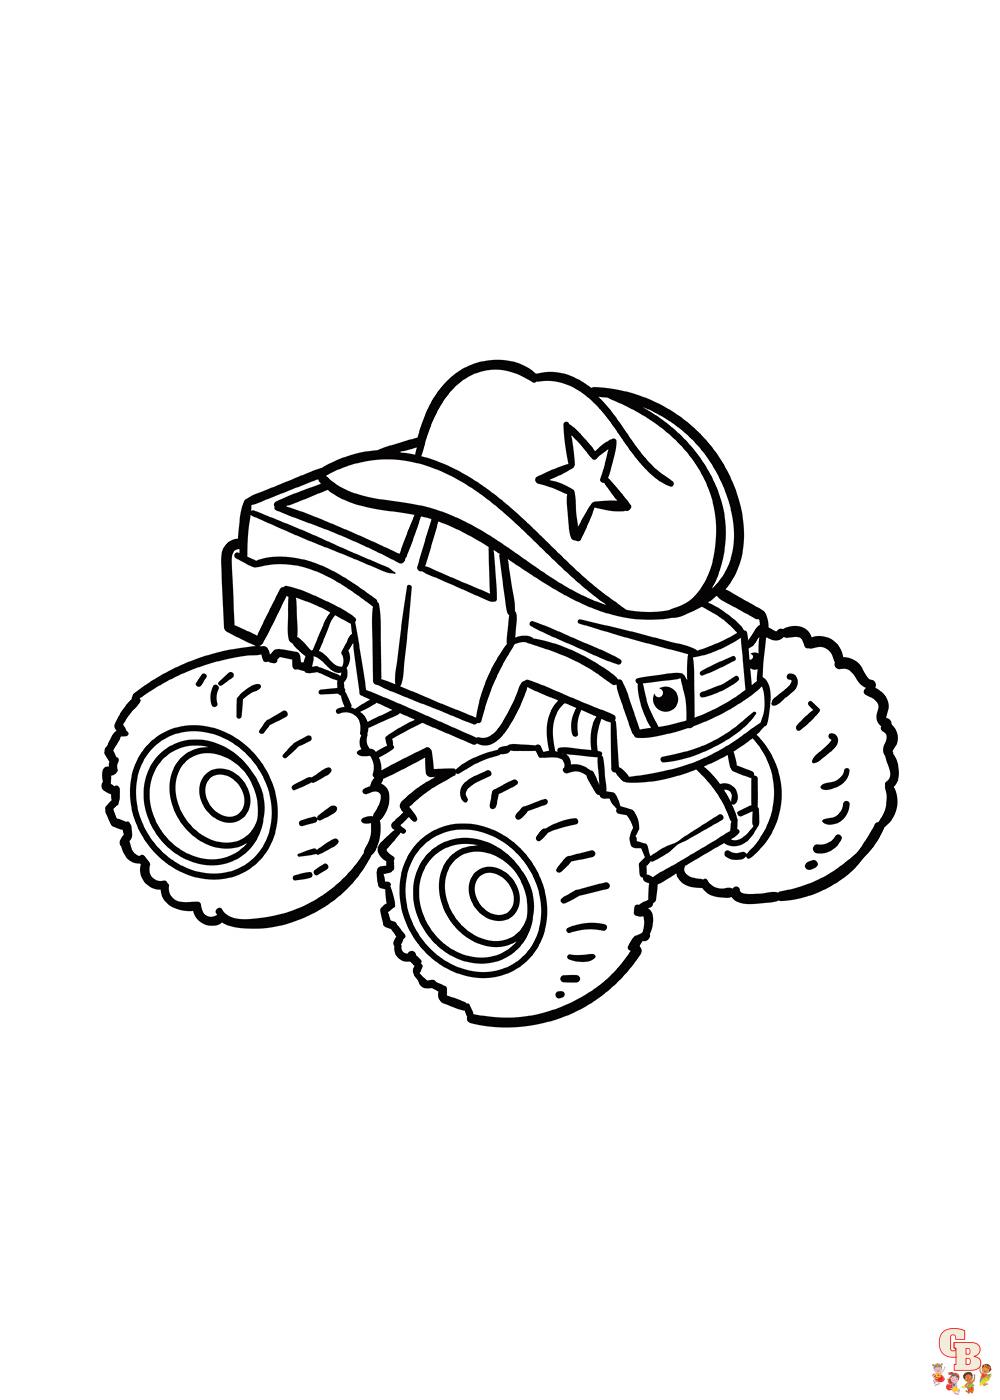 Blaze coloring pages 8